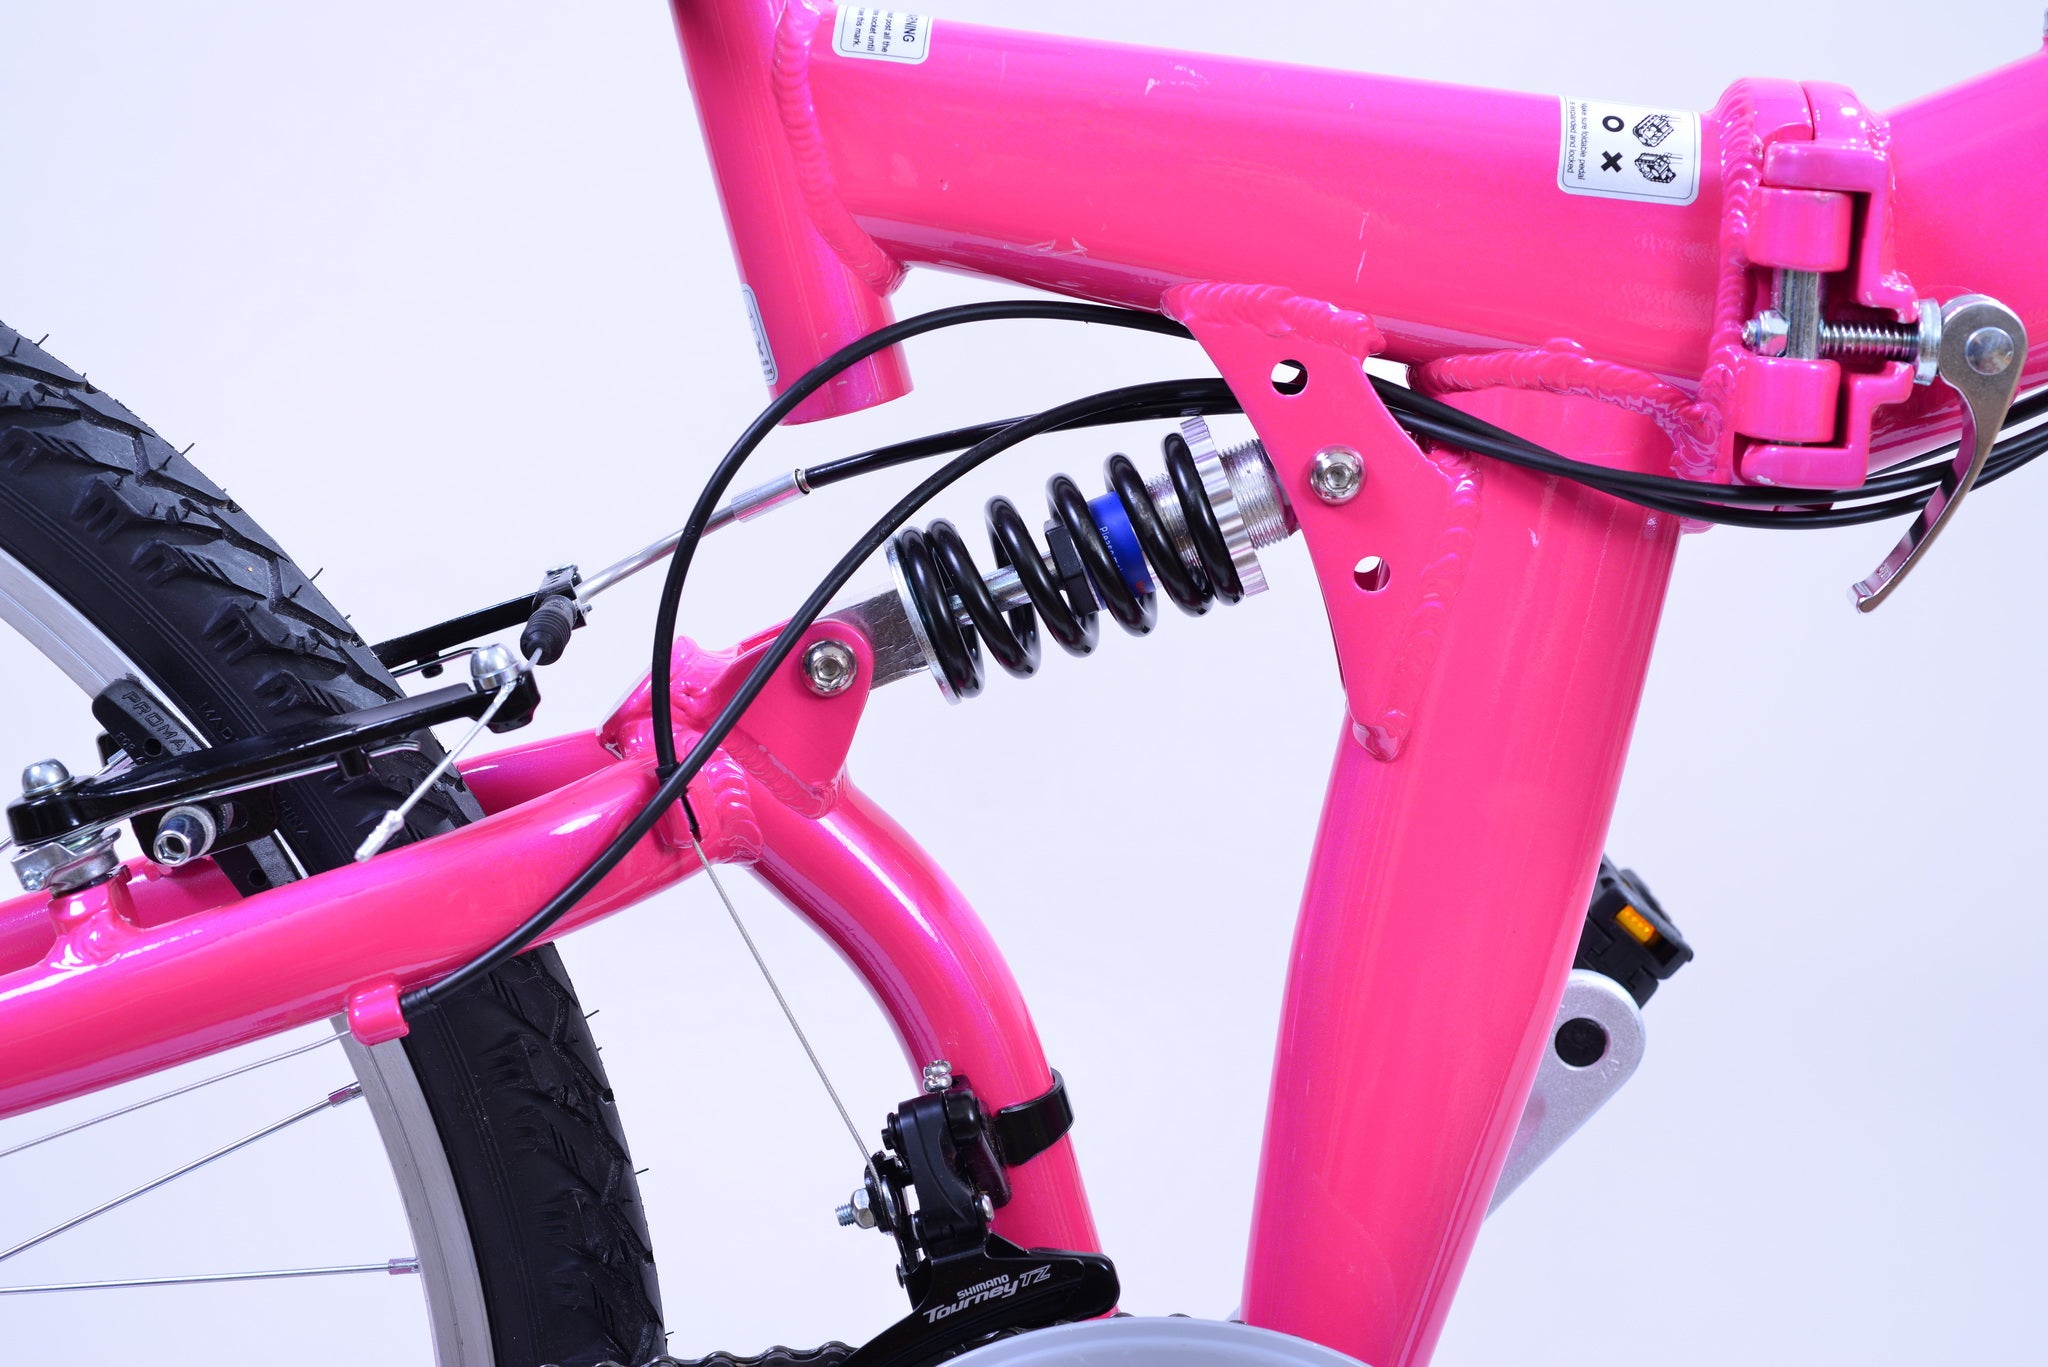 View of the spring of a foldable pink bicycle.